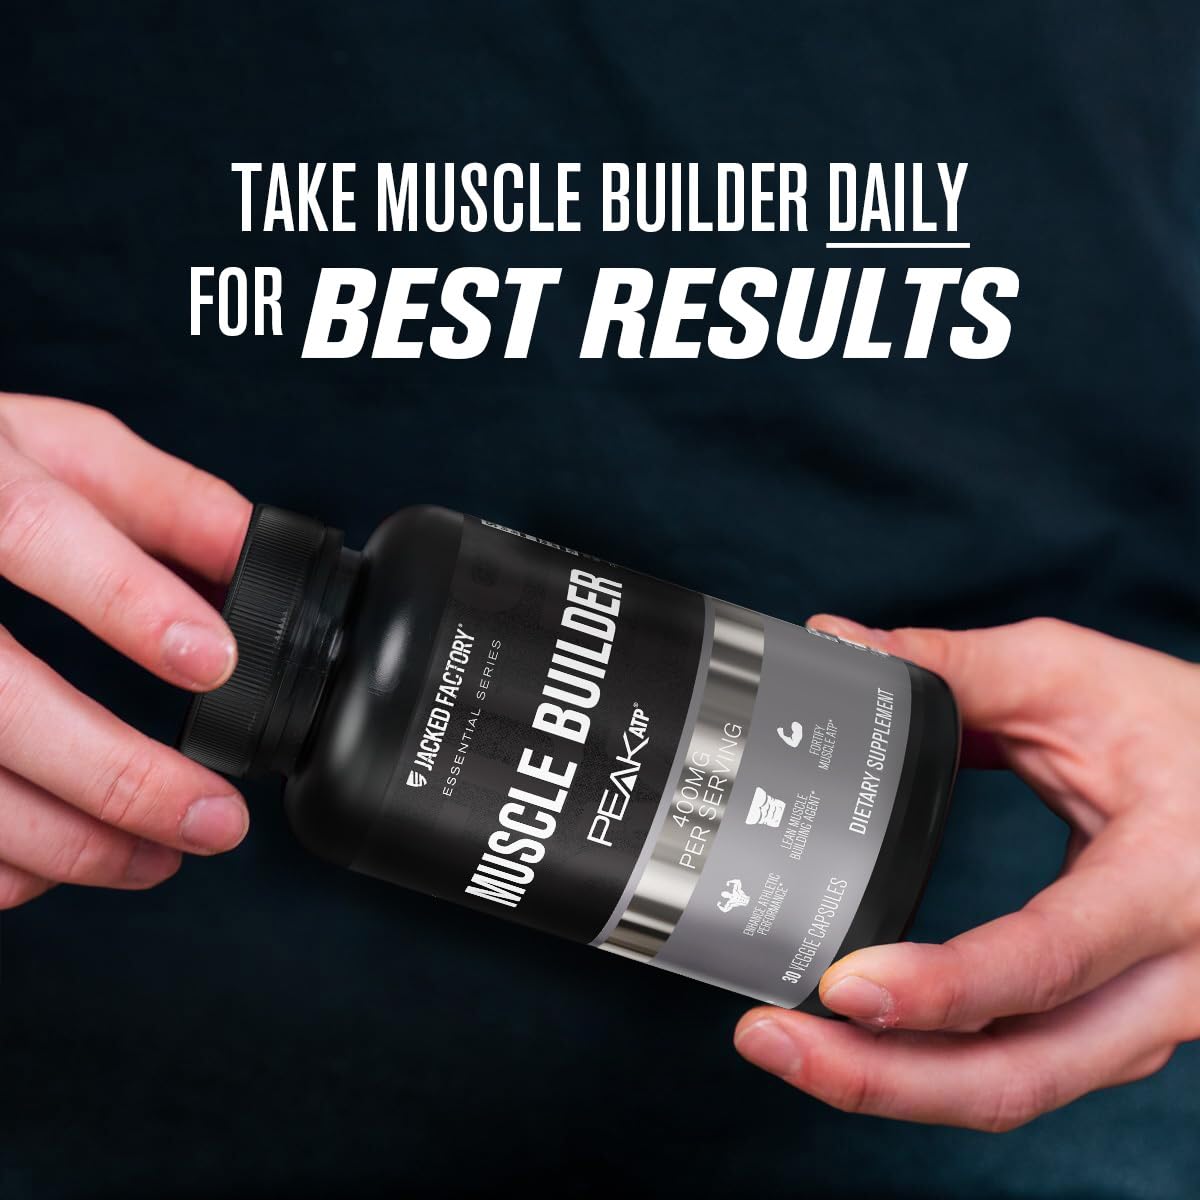 Jacked Factory Muscle Building Supplement Stack | Essentials Muscle Builder - Daily Muscle Builder & Essentials HMB for Lean Muscle Growth